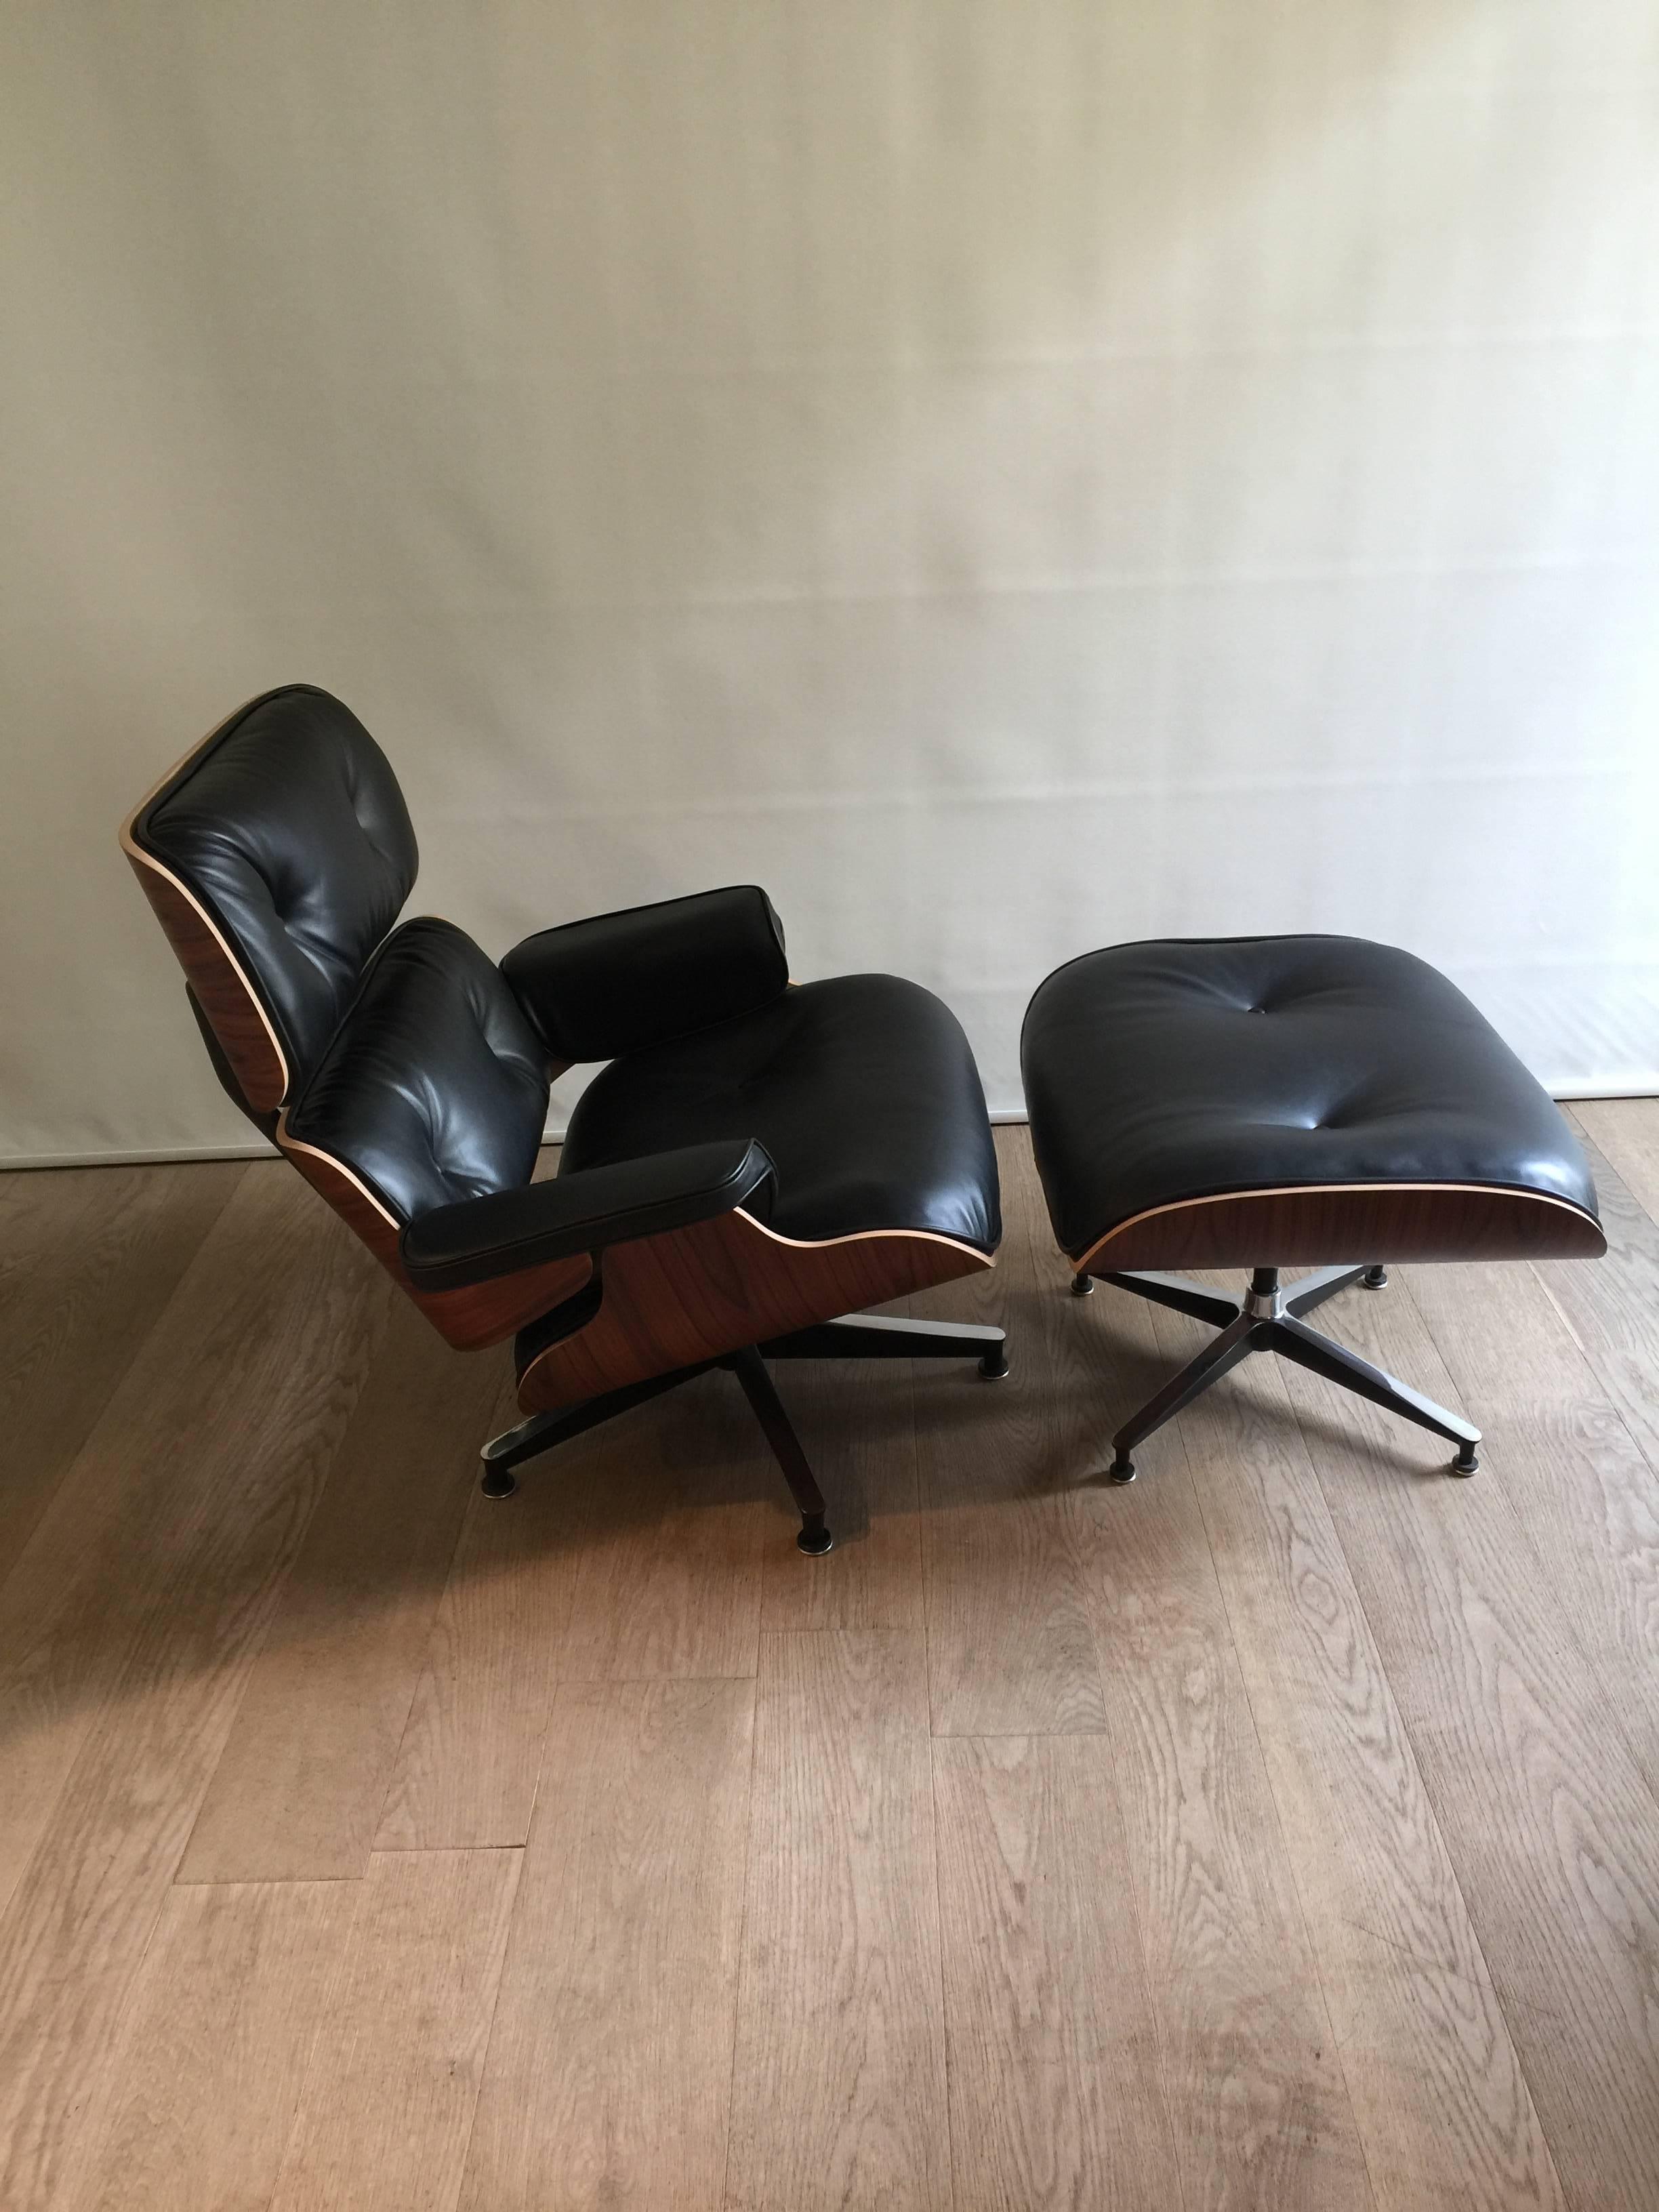 Iconic lounge chair with ottoman designed by Charles & Ray Eames, rosewood and black leather, Herman Miller edition, perfect conditions.